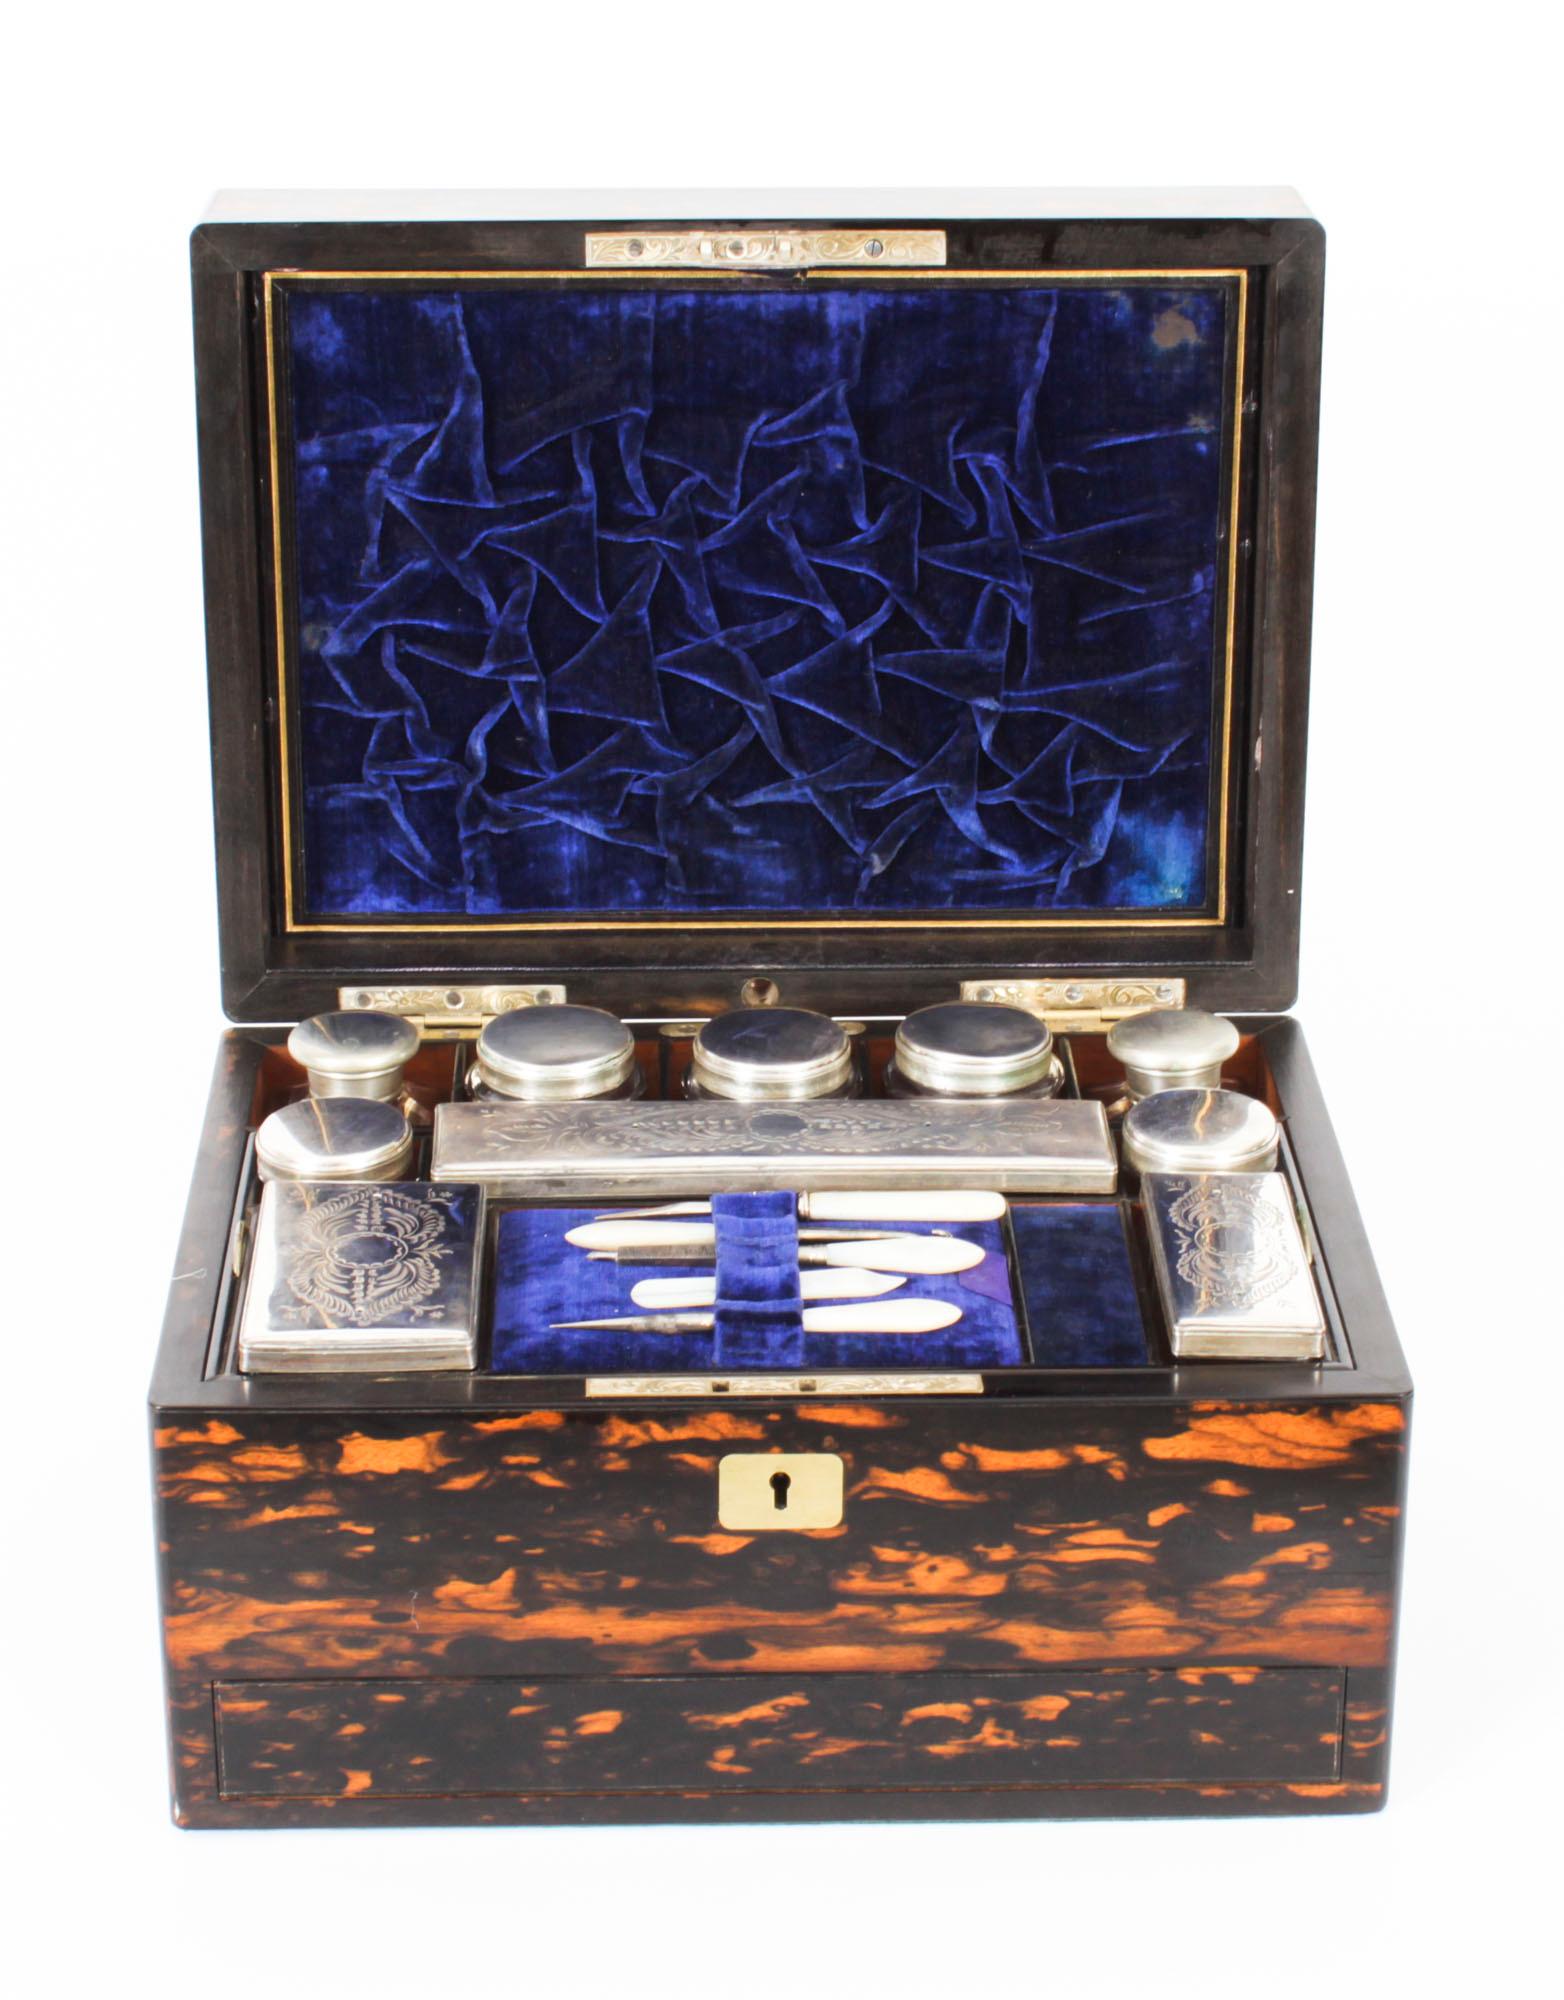 This is a stunning antique Victorian Coromandel travelling case with fitted interior, circa 1830 in date.
 
This traveling case is made of rare coromandel wood and features a brass plaques. The interior is well fitted with te Sheffield silver